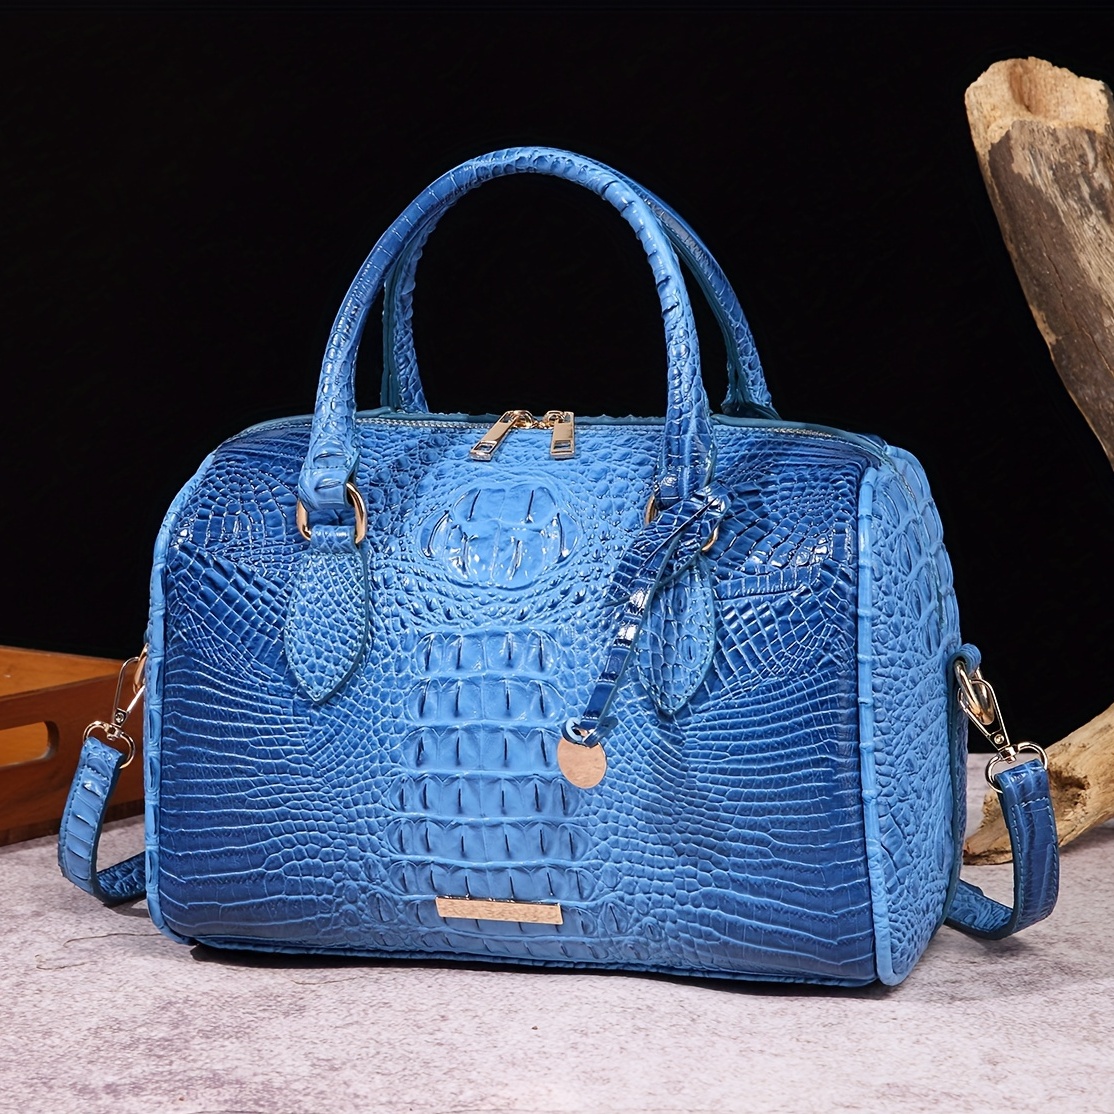 Real Crocodile Leather? Brahmin Leather Bag Review 